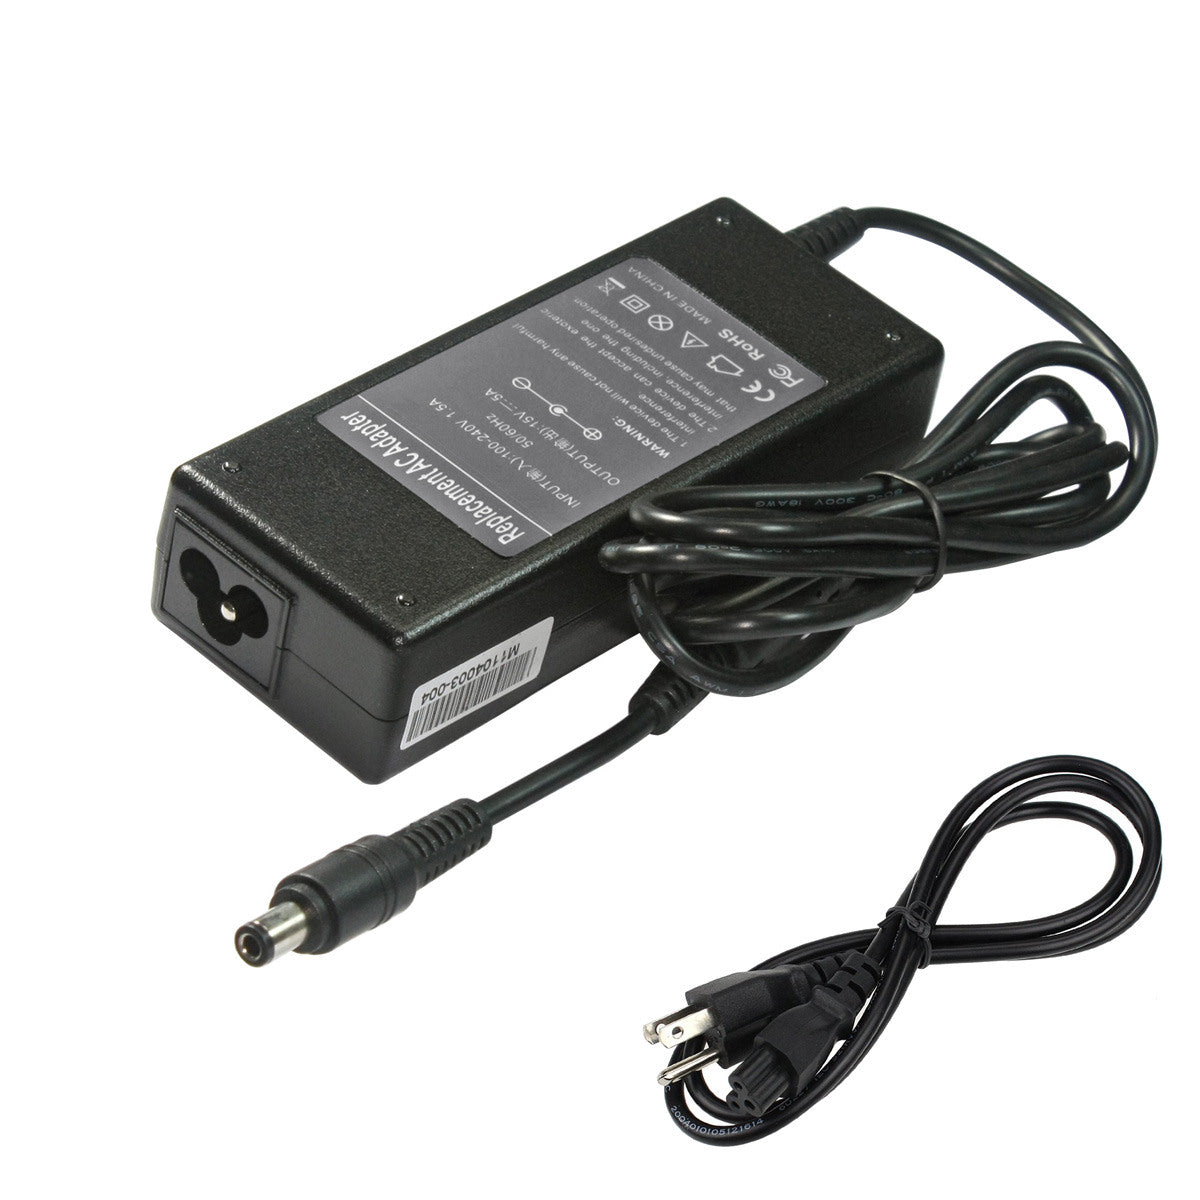 Compatible Replacement Toshiba Satellite M115-S3104 AC Adapter.